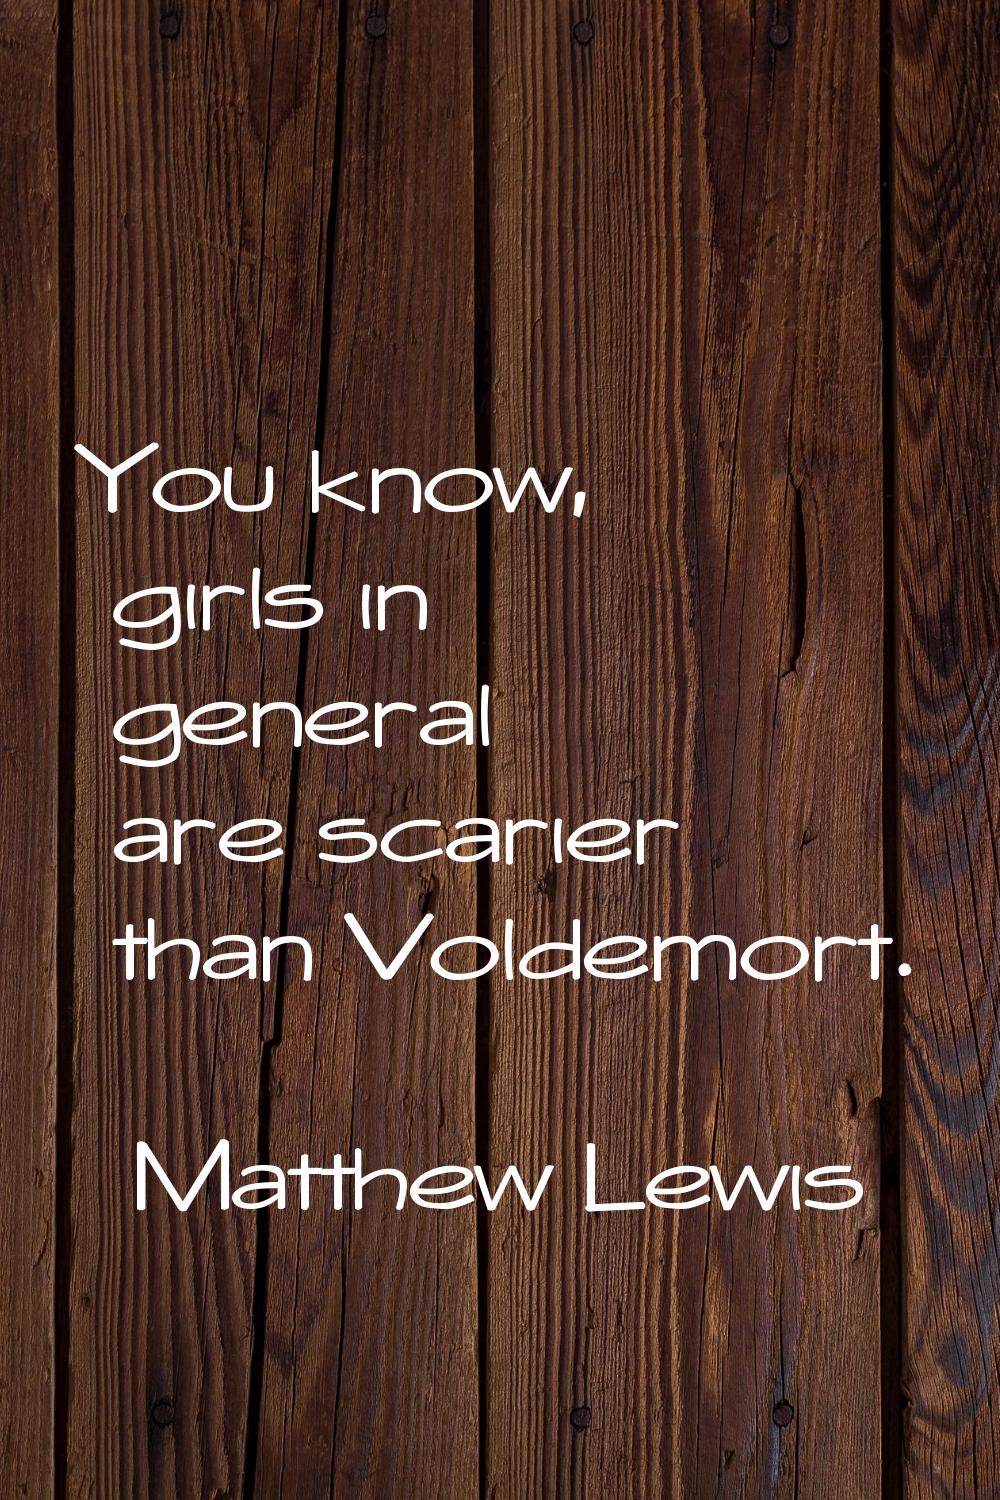 You know, girls in general are scarier than Voldemort.